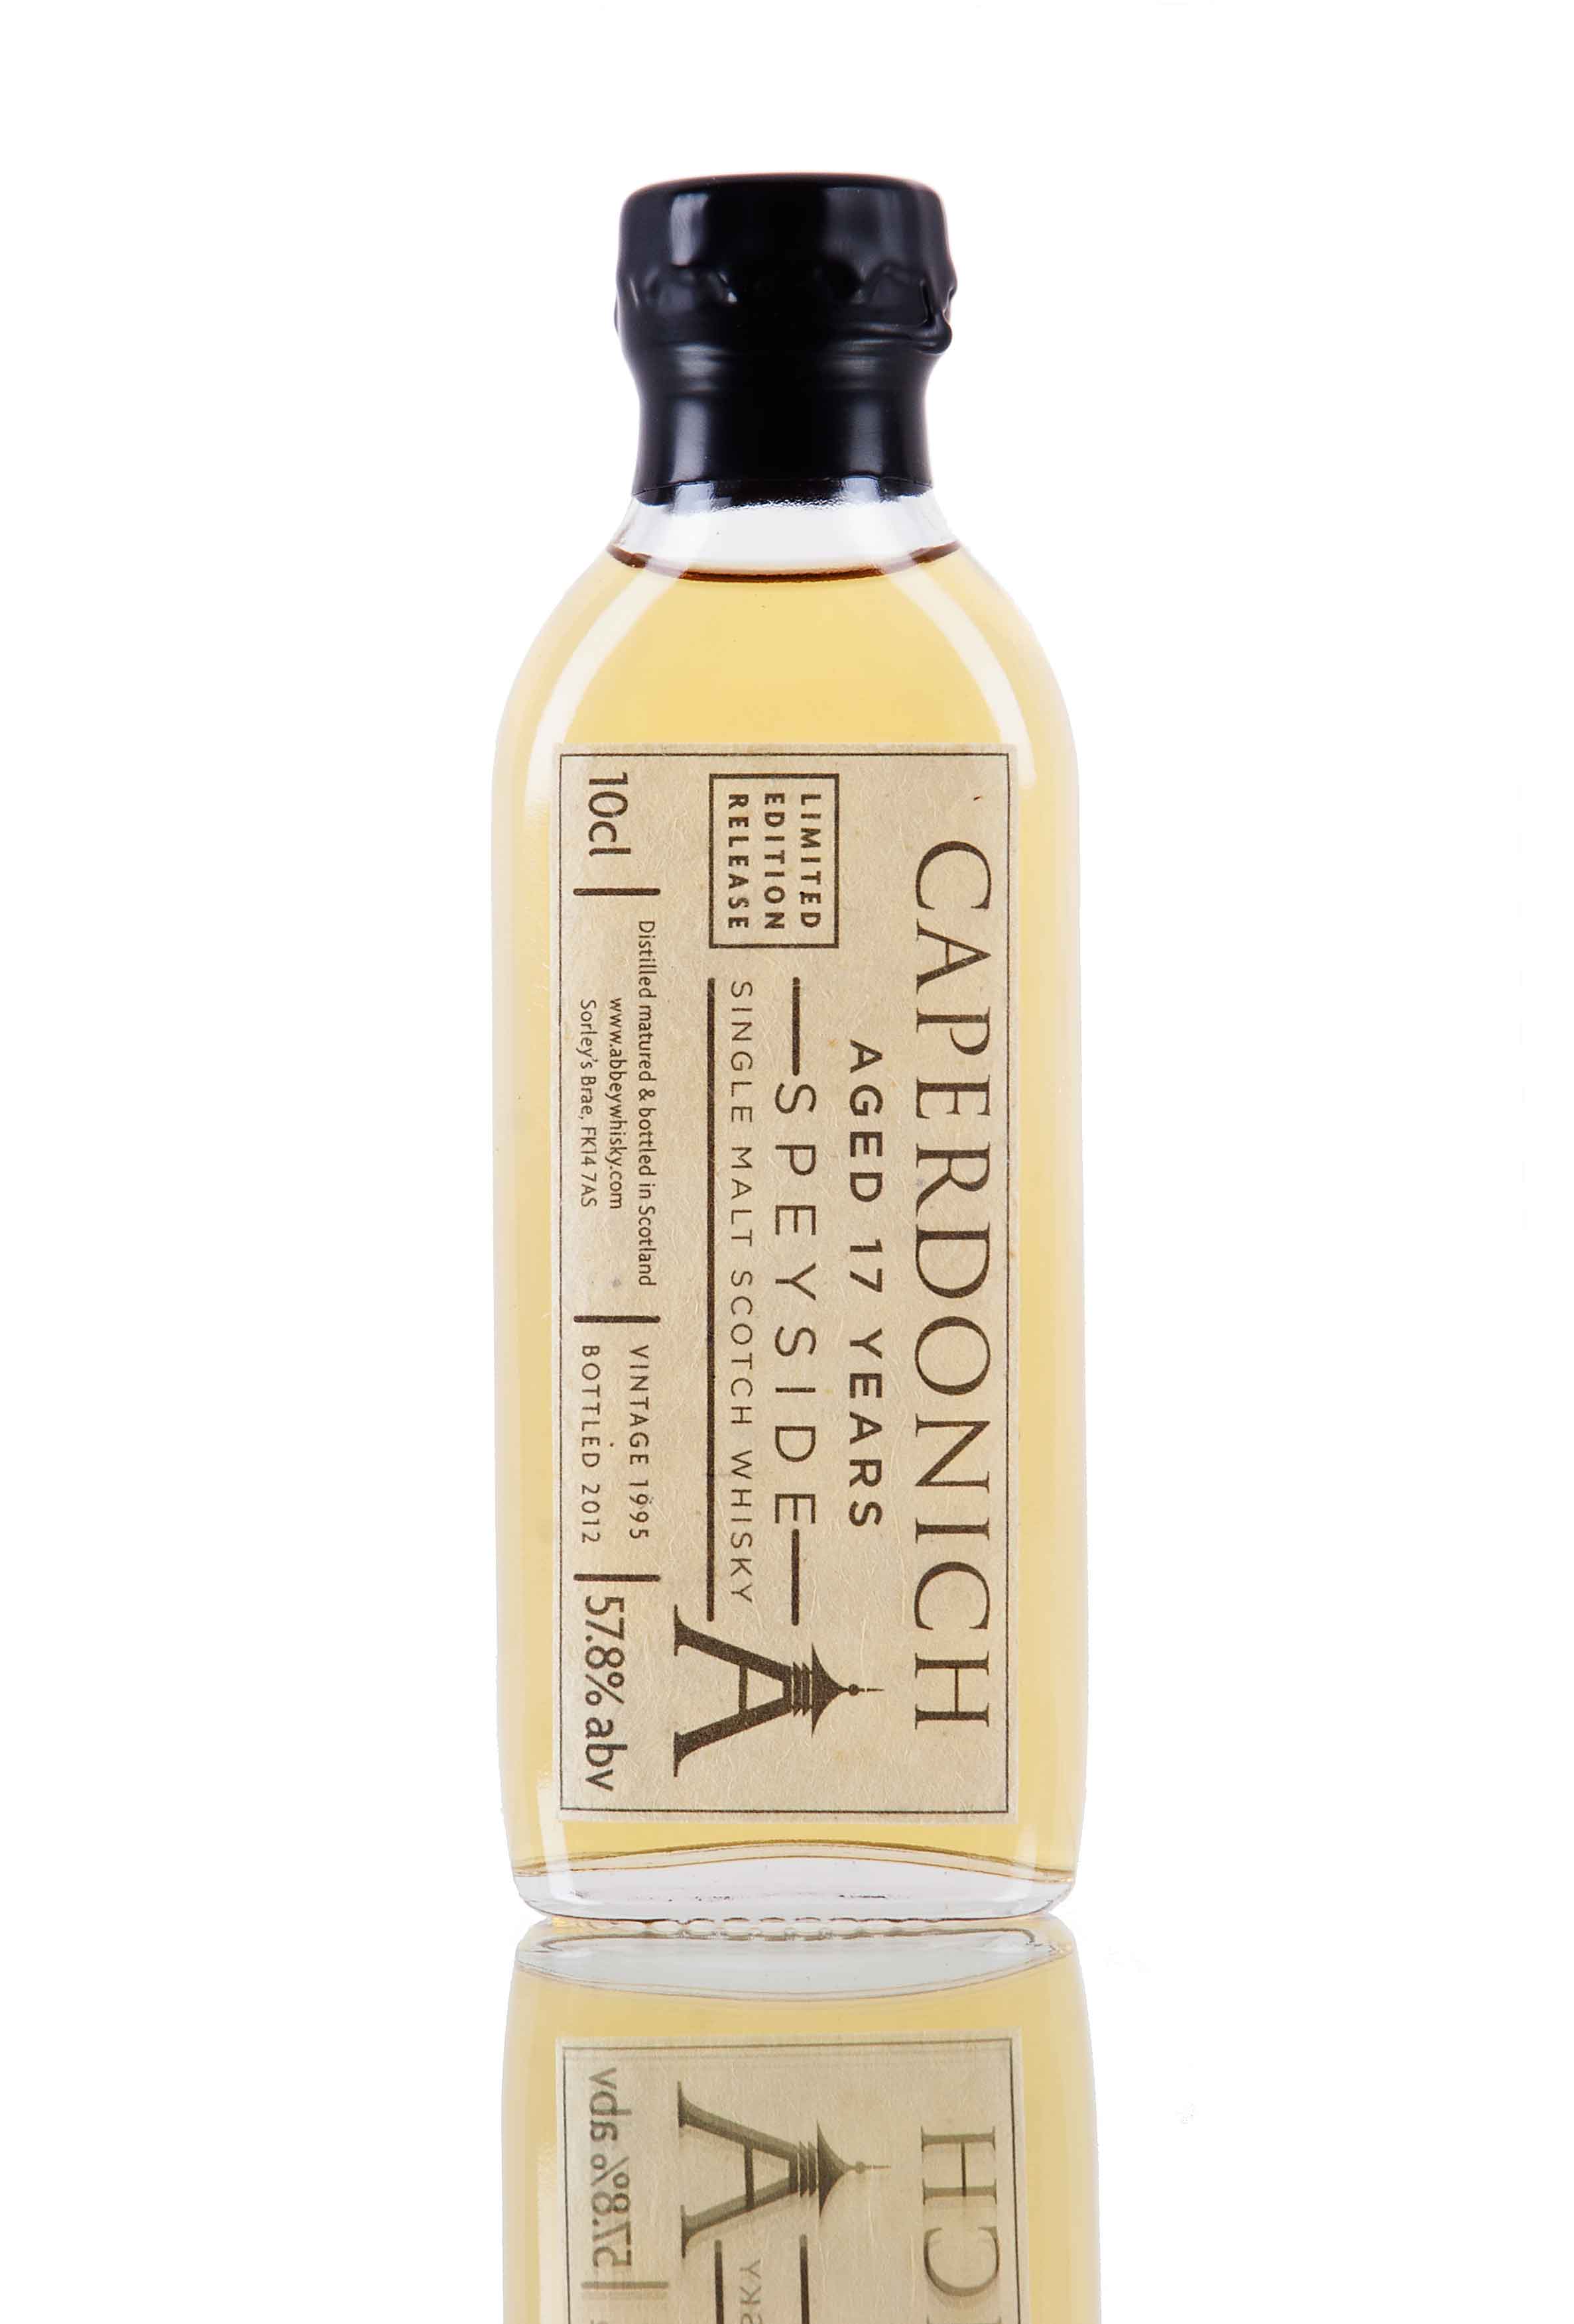 Caperdonich 17 Year Old - The Rare Casks / 10cl Sample